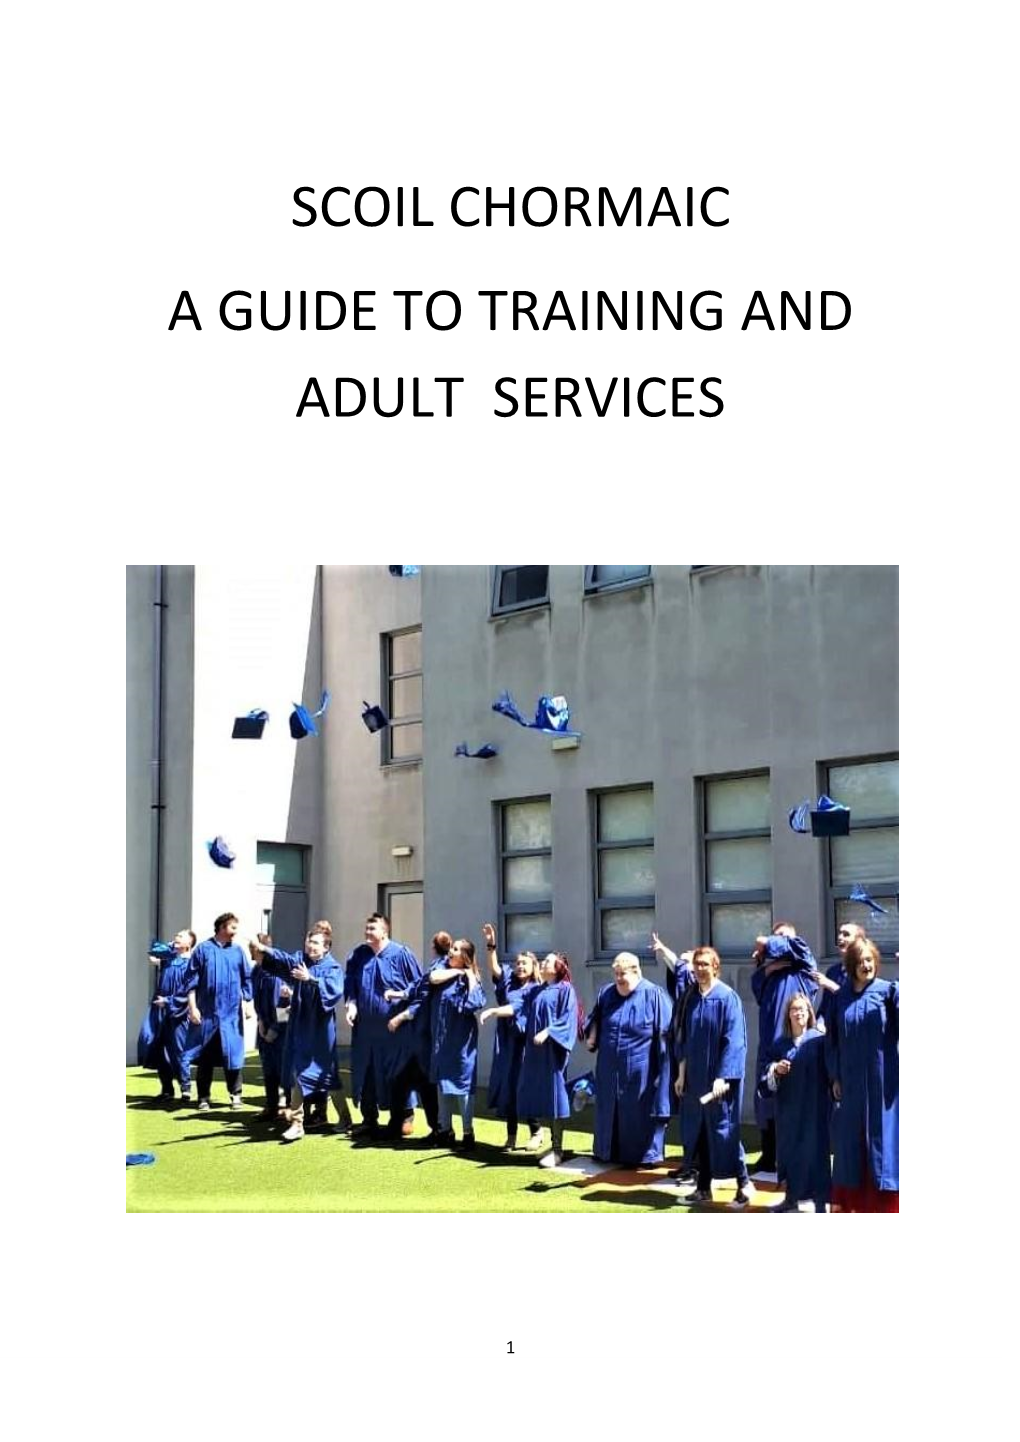 Scoil Chormaic a Guide to Training and Adult Services